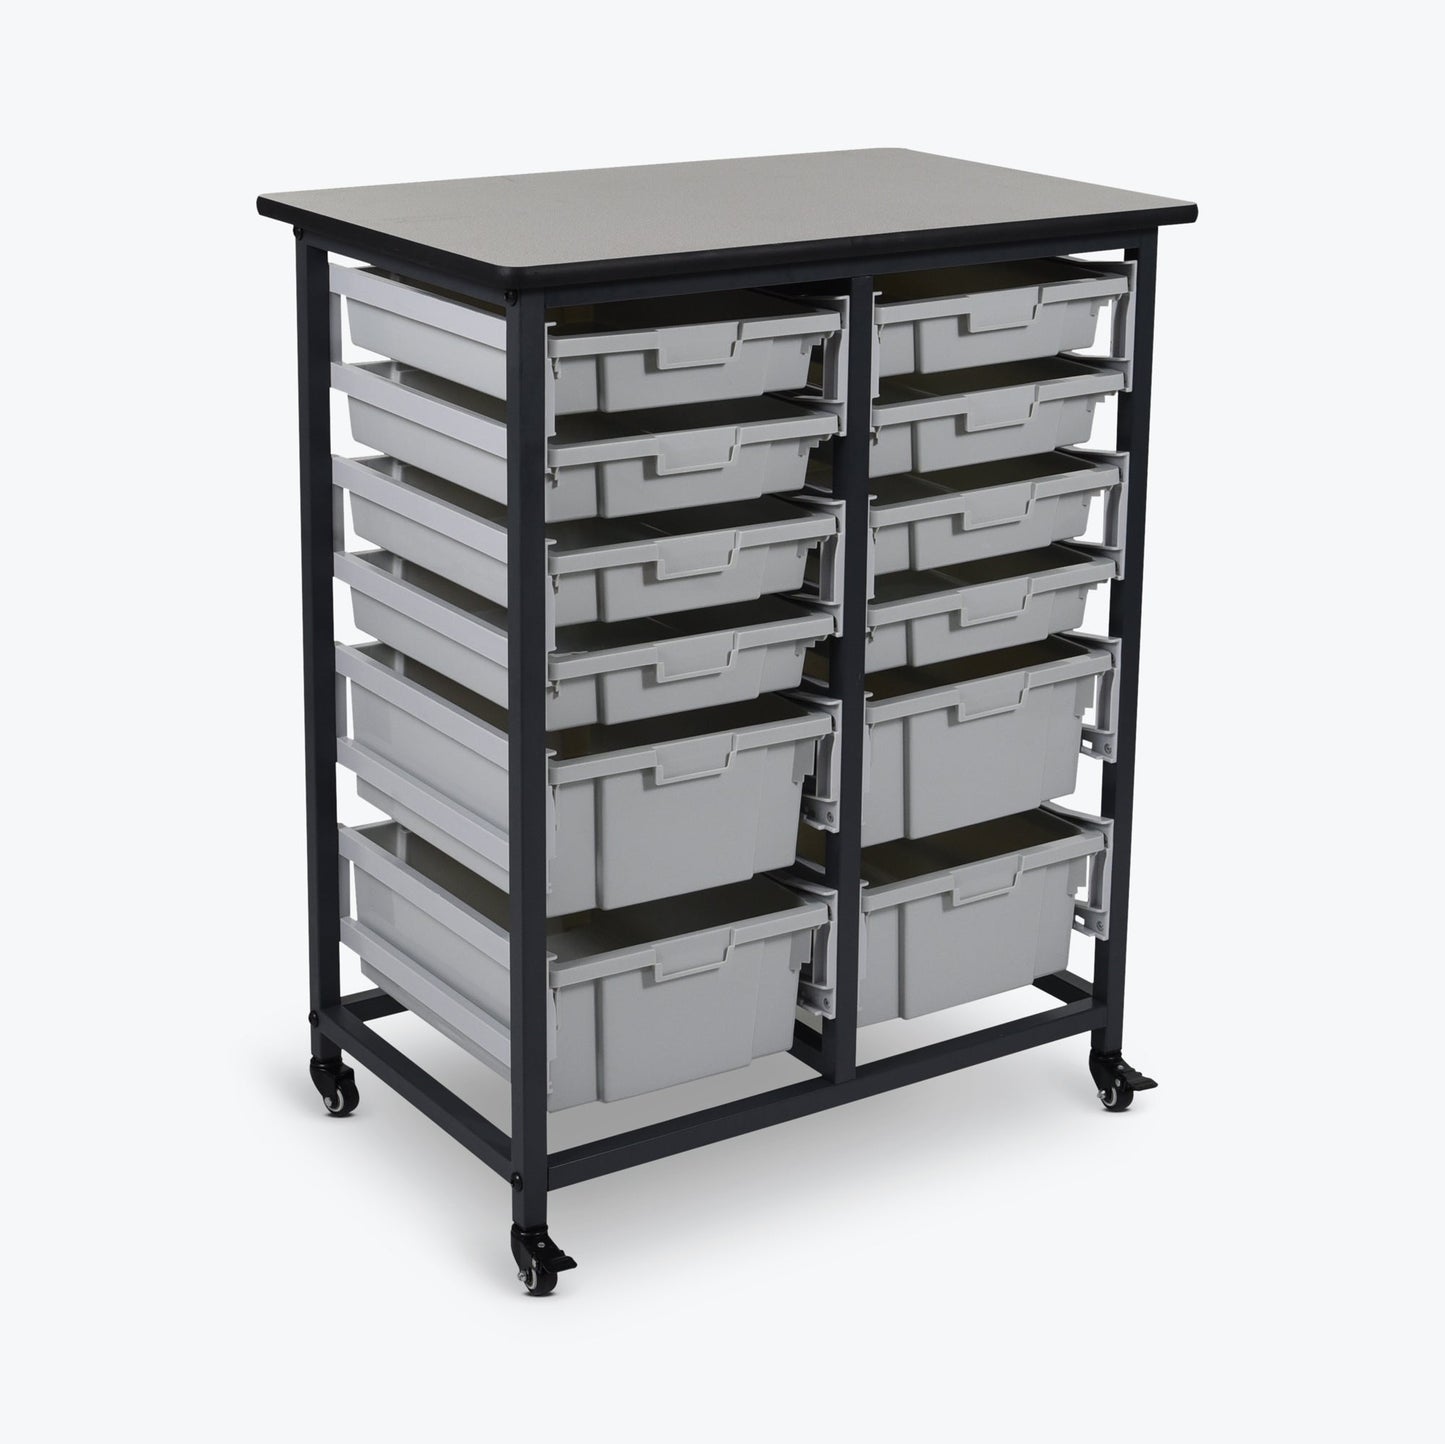 Luxor Mobile Bin Storage Unit - Double Row - Small Bins (LUX-MBS-DR-8S4L) - SchoolOutlet